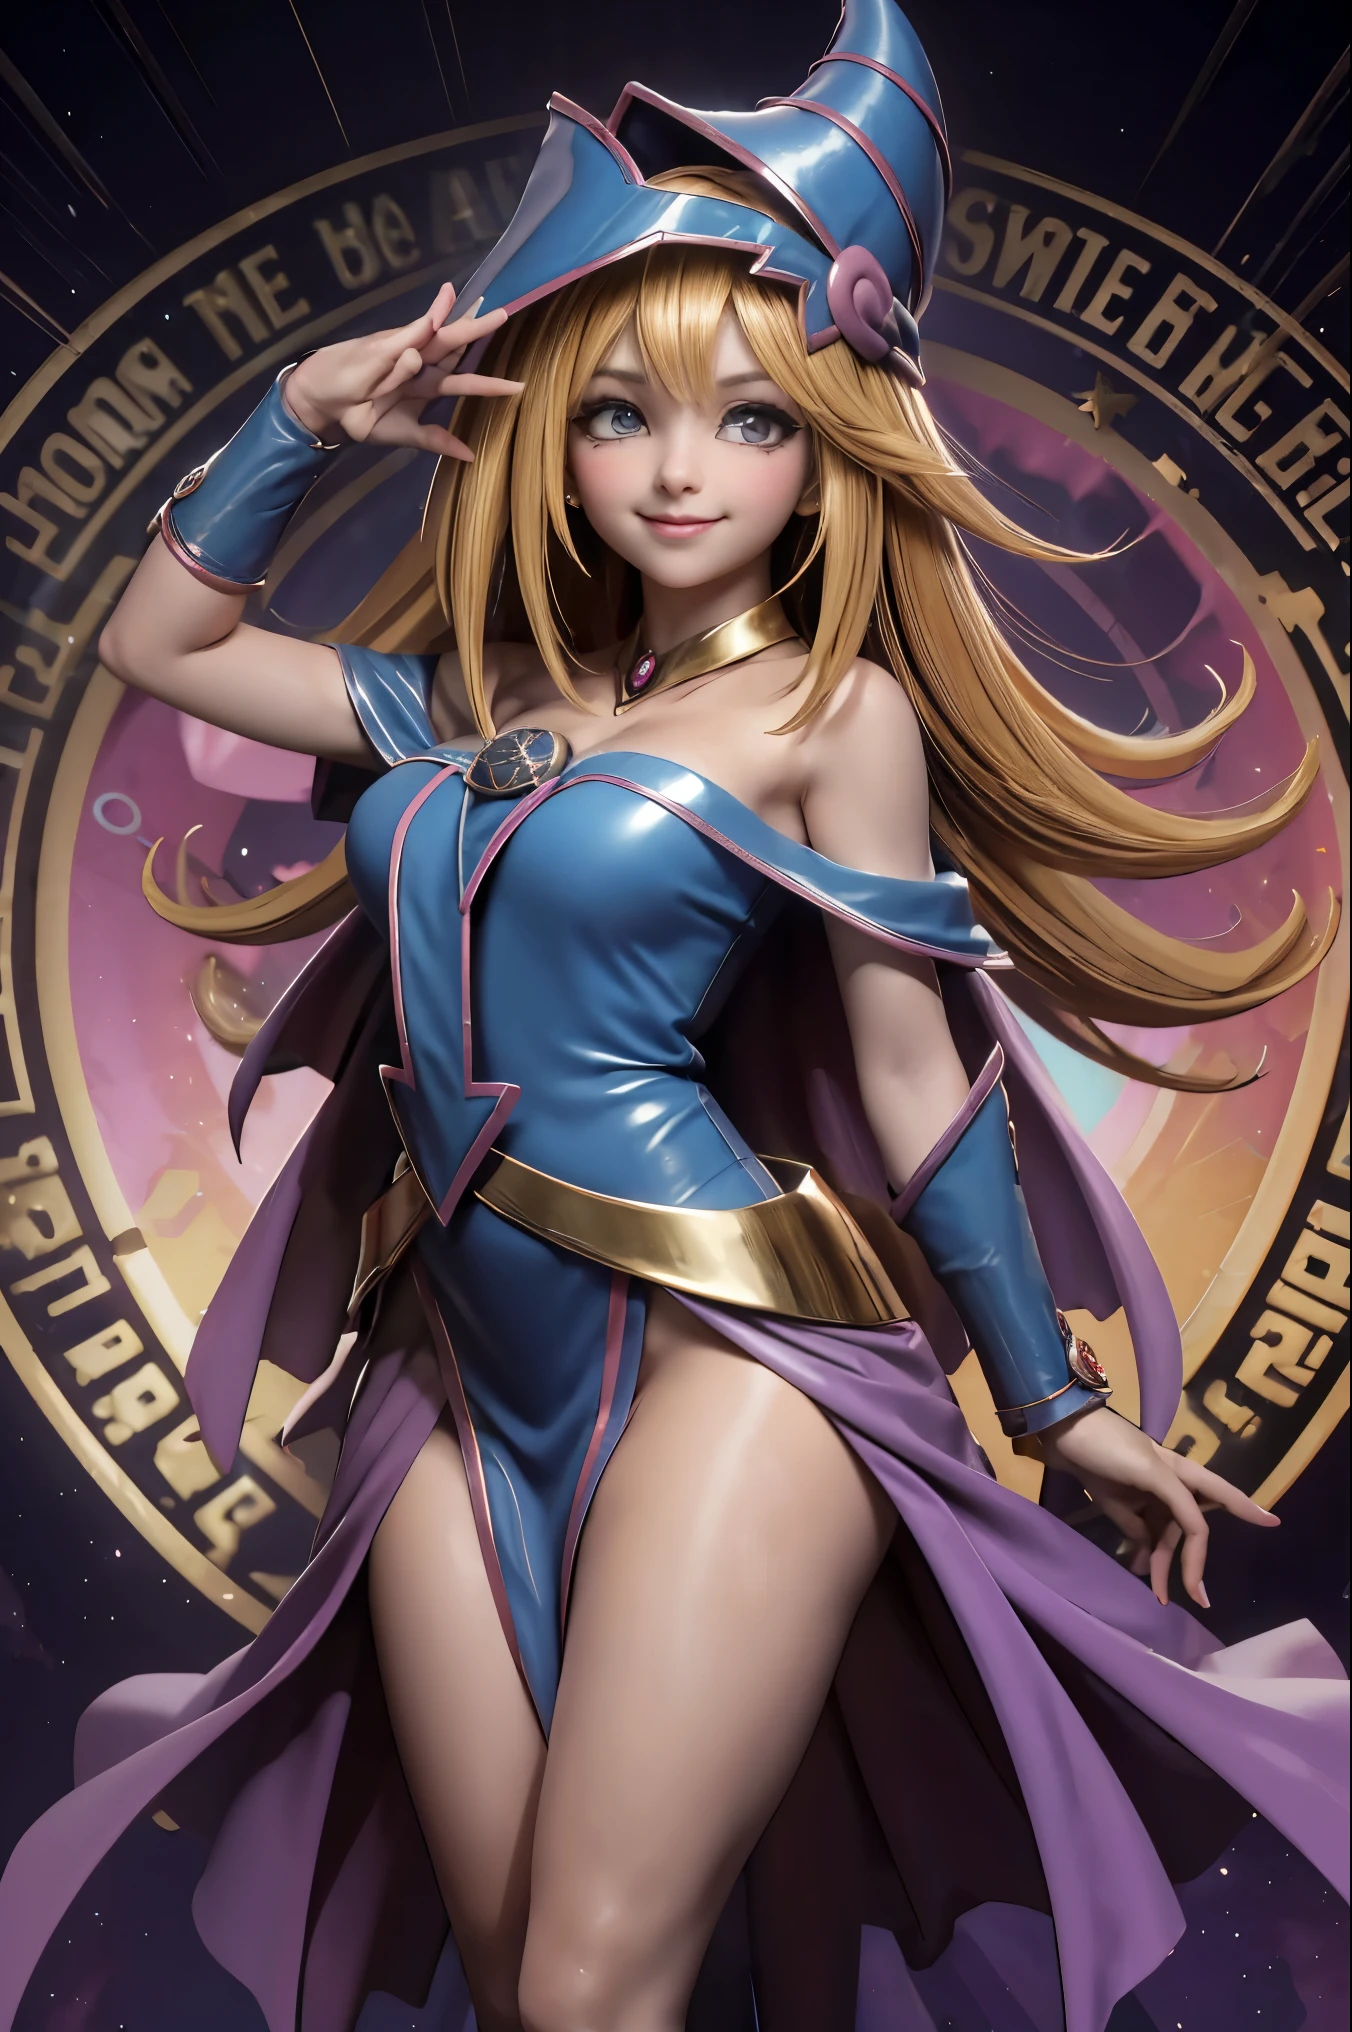 Dark magician gils flying, she comes out of a magic circle of heart. Magic hearts background. smile on his lips. blue eyes. Golden hair. pose sensual. Levitating on one foot. has heels. has stockings. has earrings. has rings. She has transparent clothes 